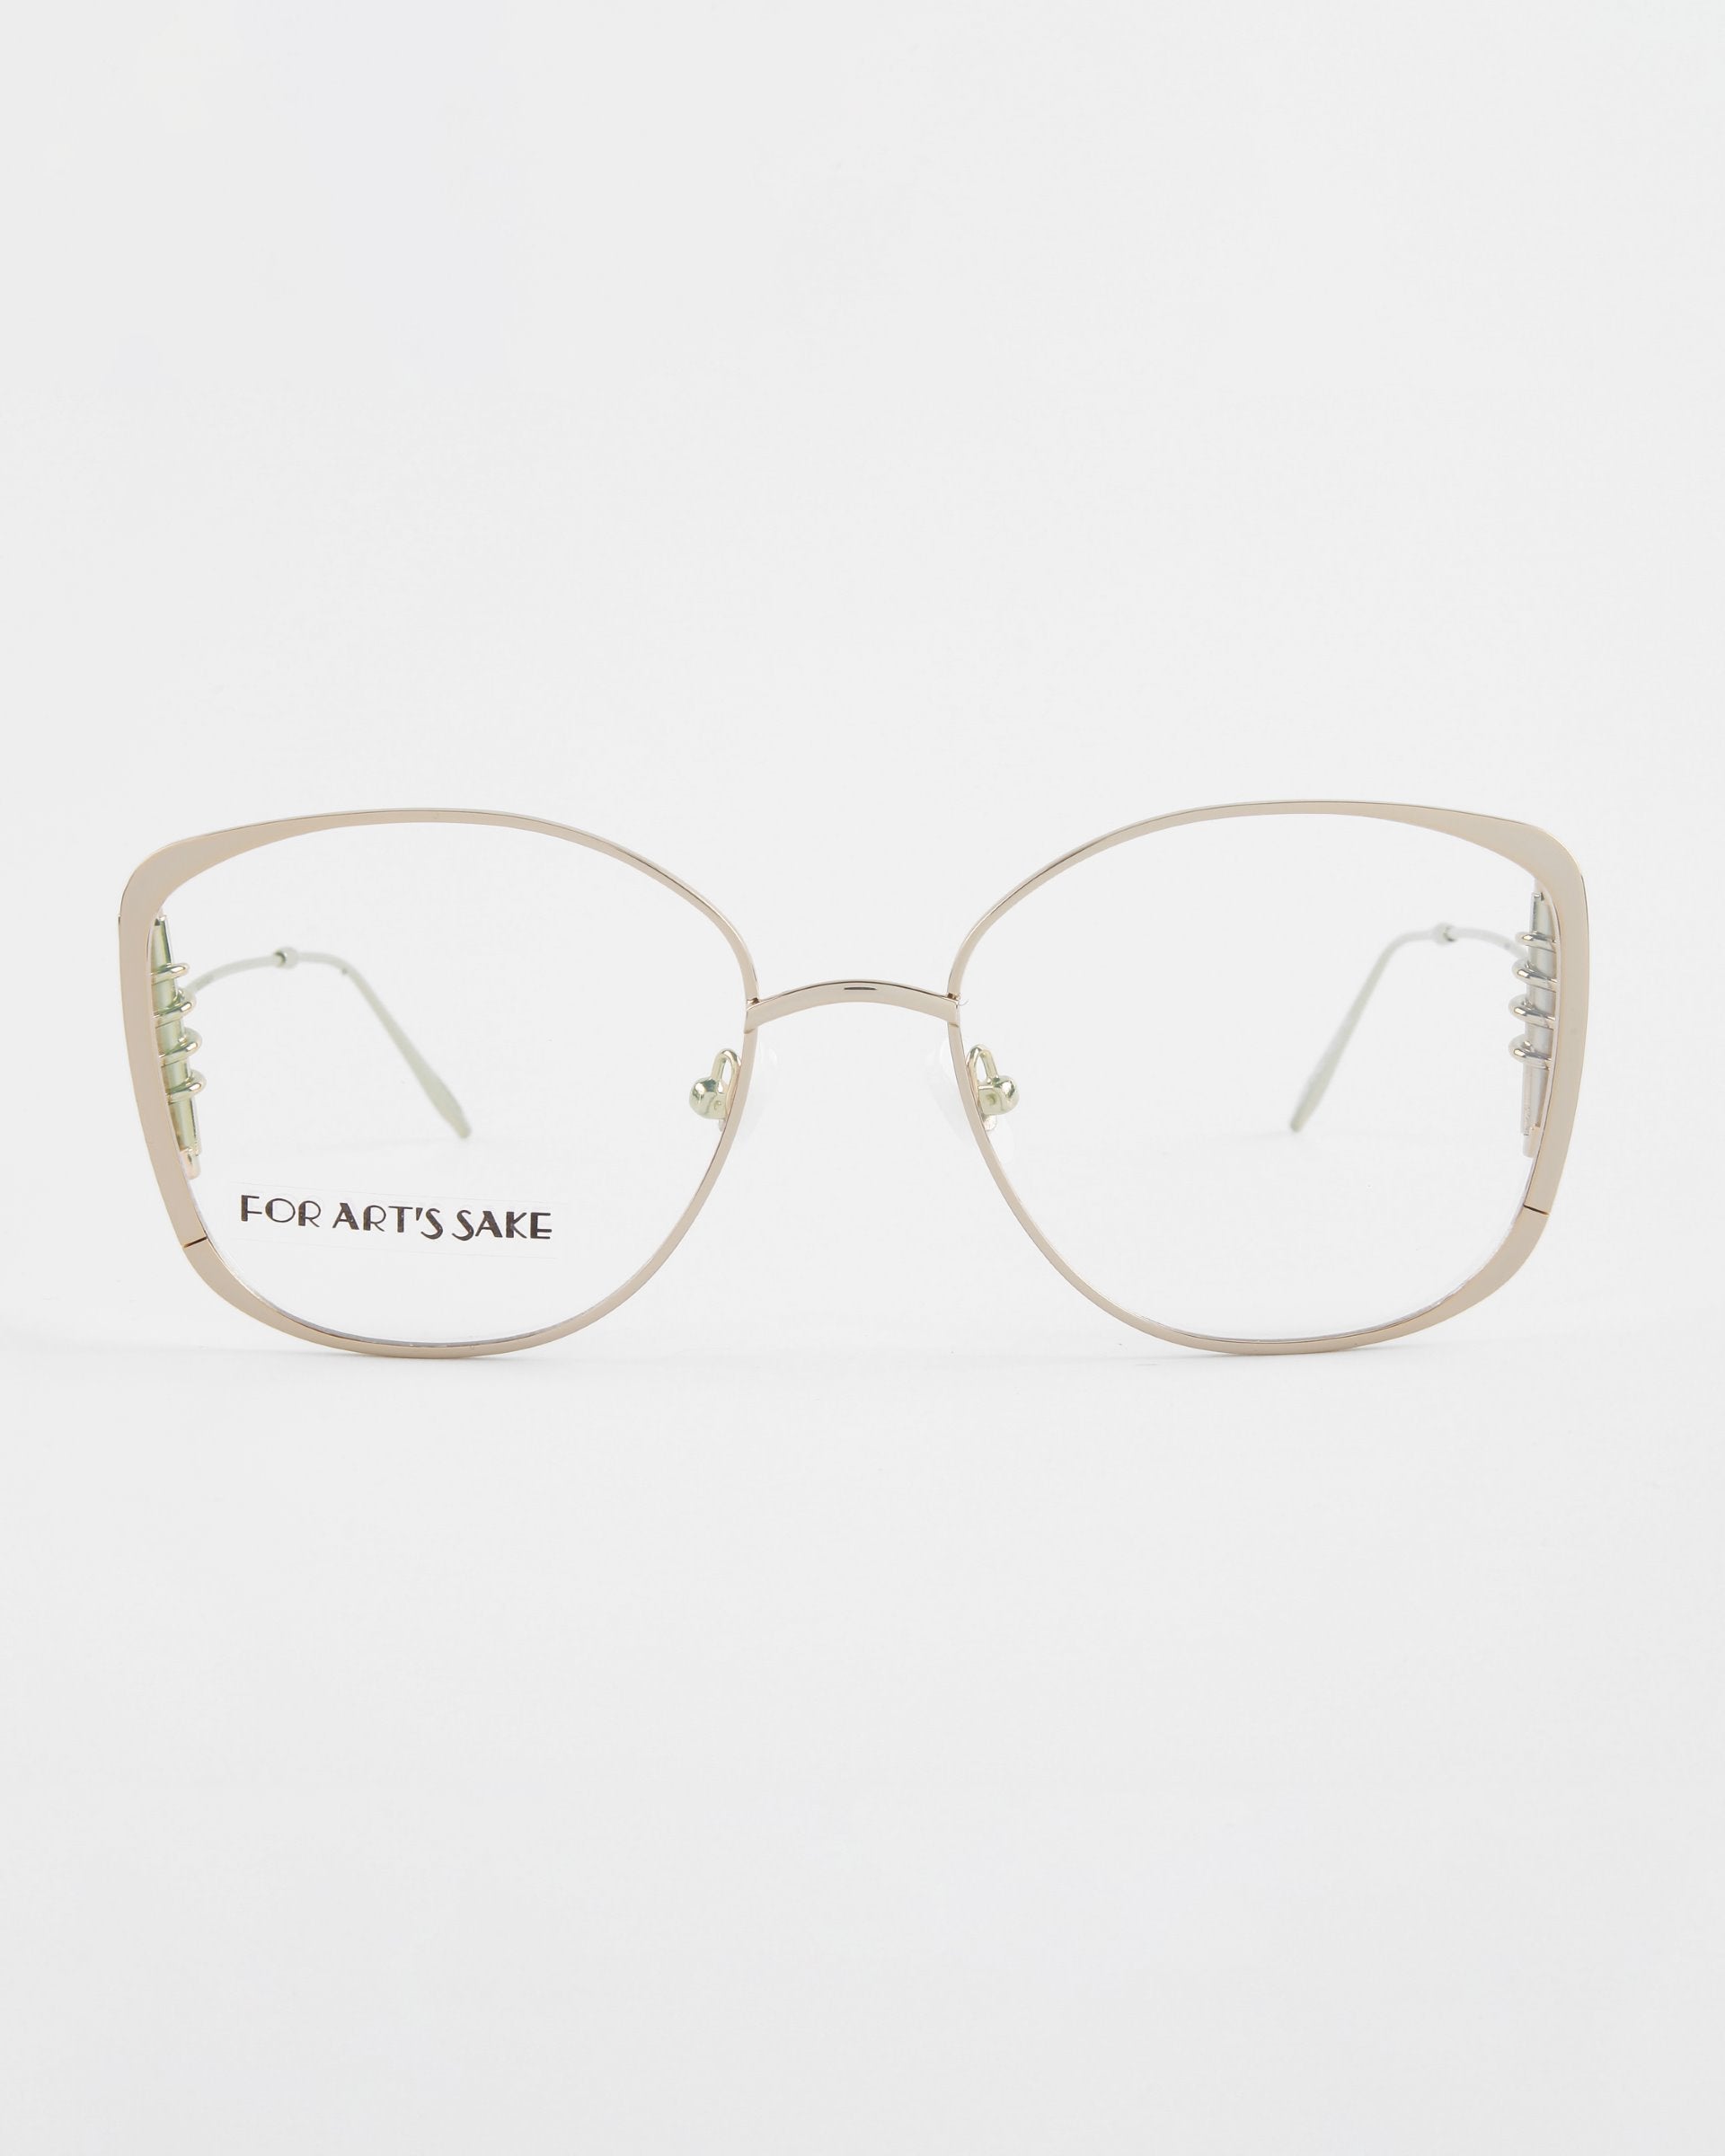 A pair of gold-rimmed eyeglasses with large, square-shaped lenses. The glasses have thin, lightweight frames with 18-karat gold plating and clear lenses. The product name "Jupiter" and the brand name "For Art's Sake®" are visible on the left lens. The background is white.